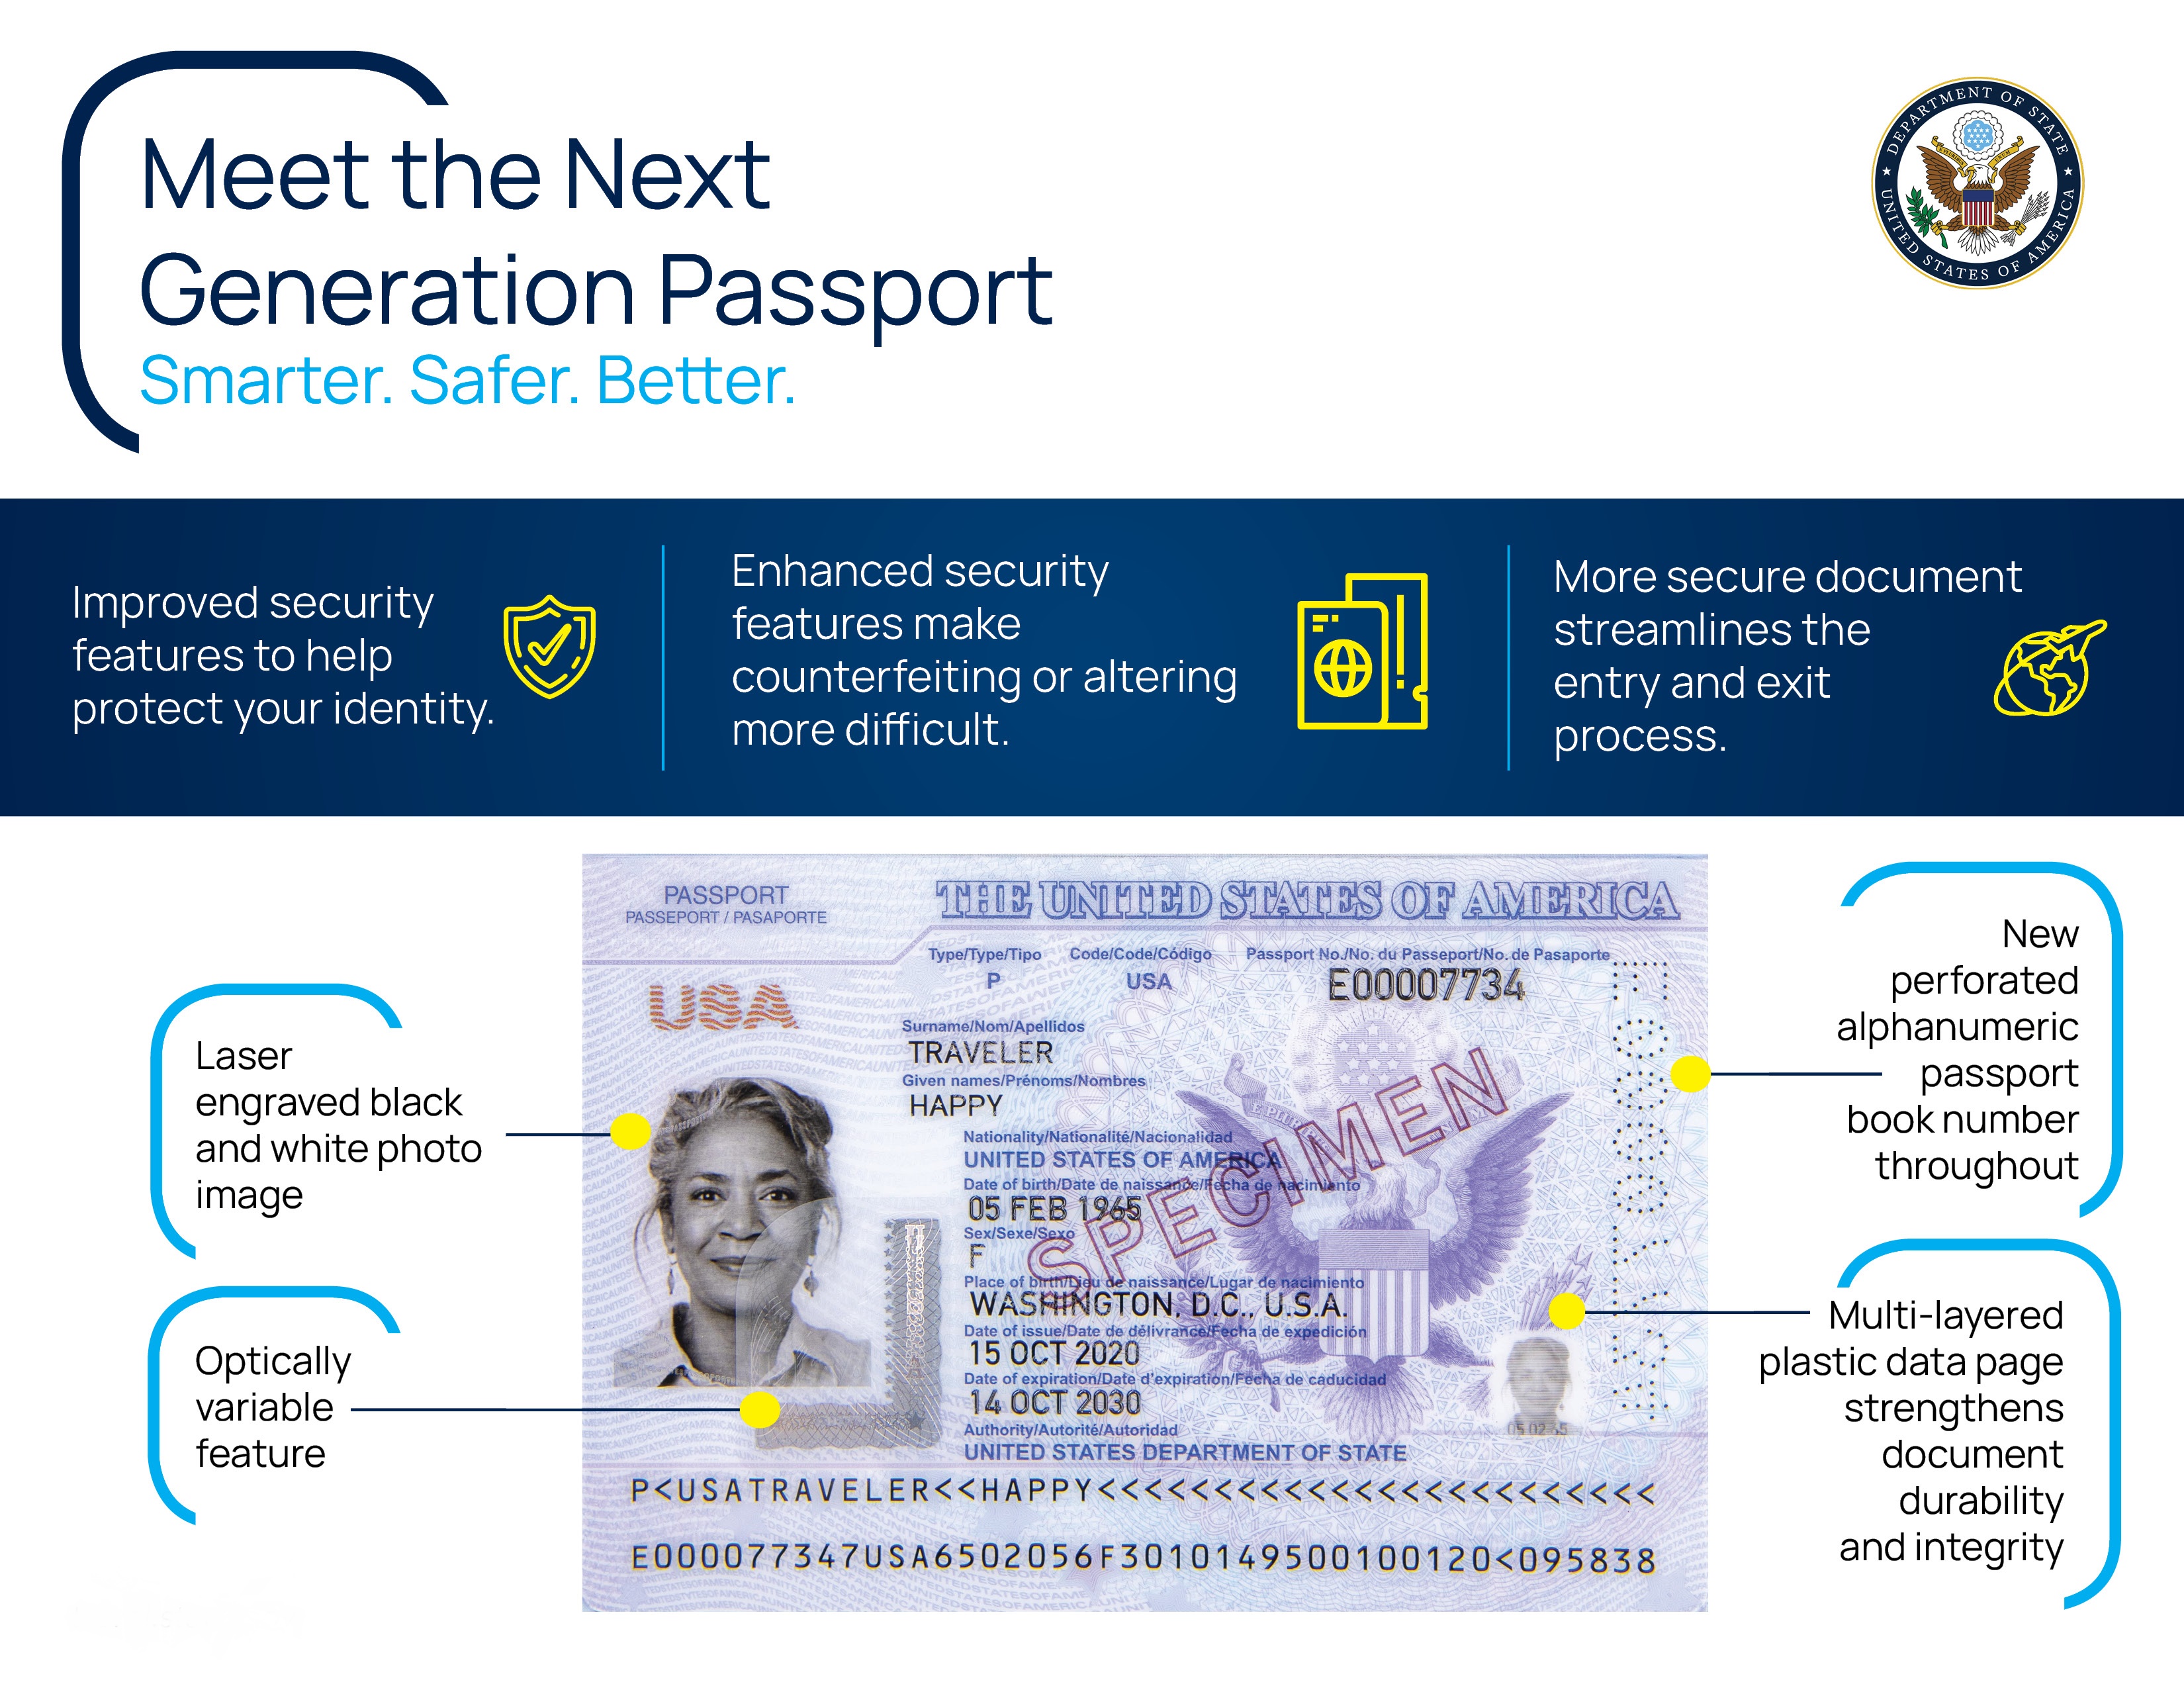 Highlights and features of the new U.S. passport